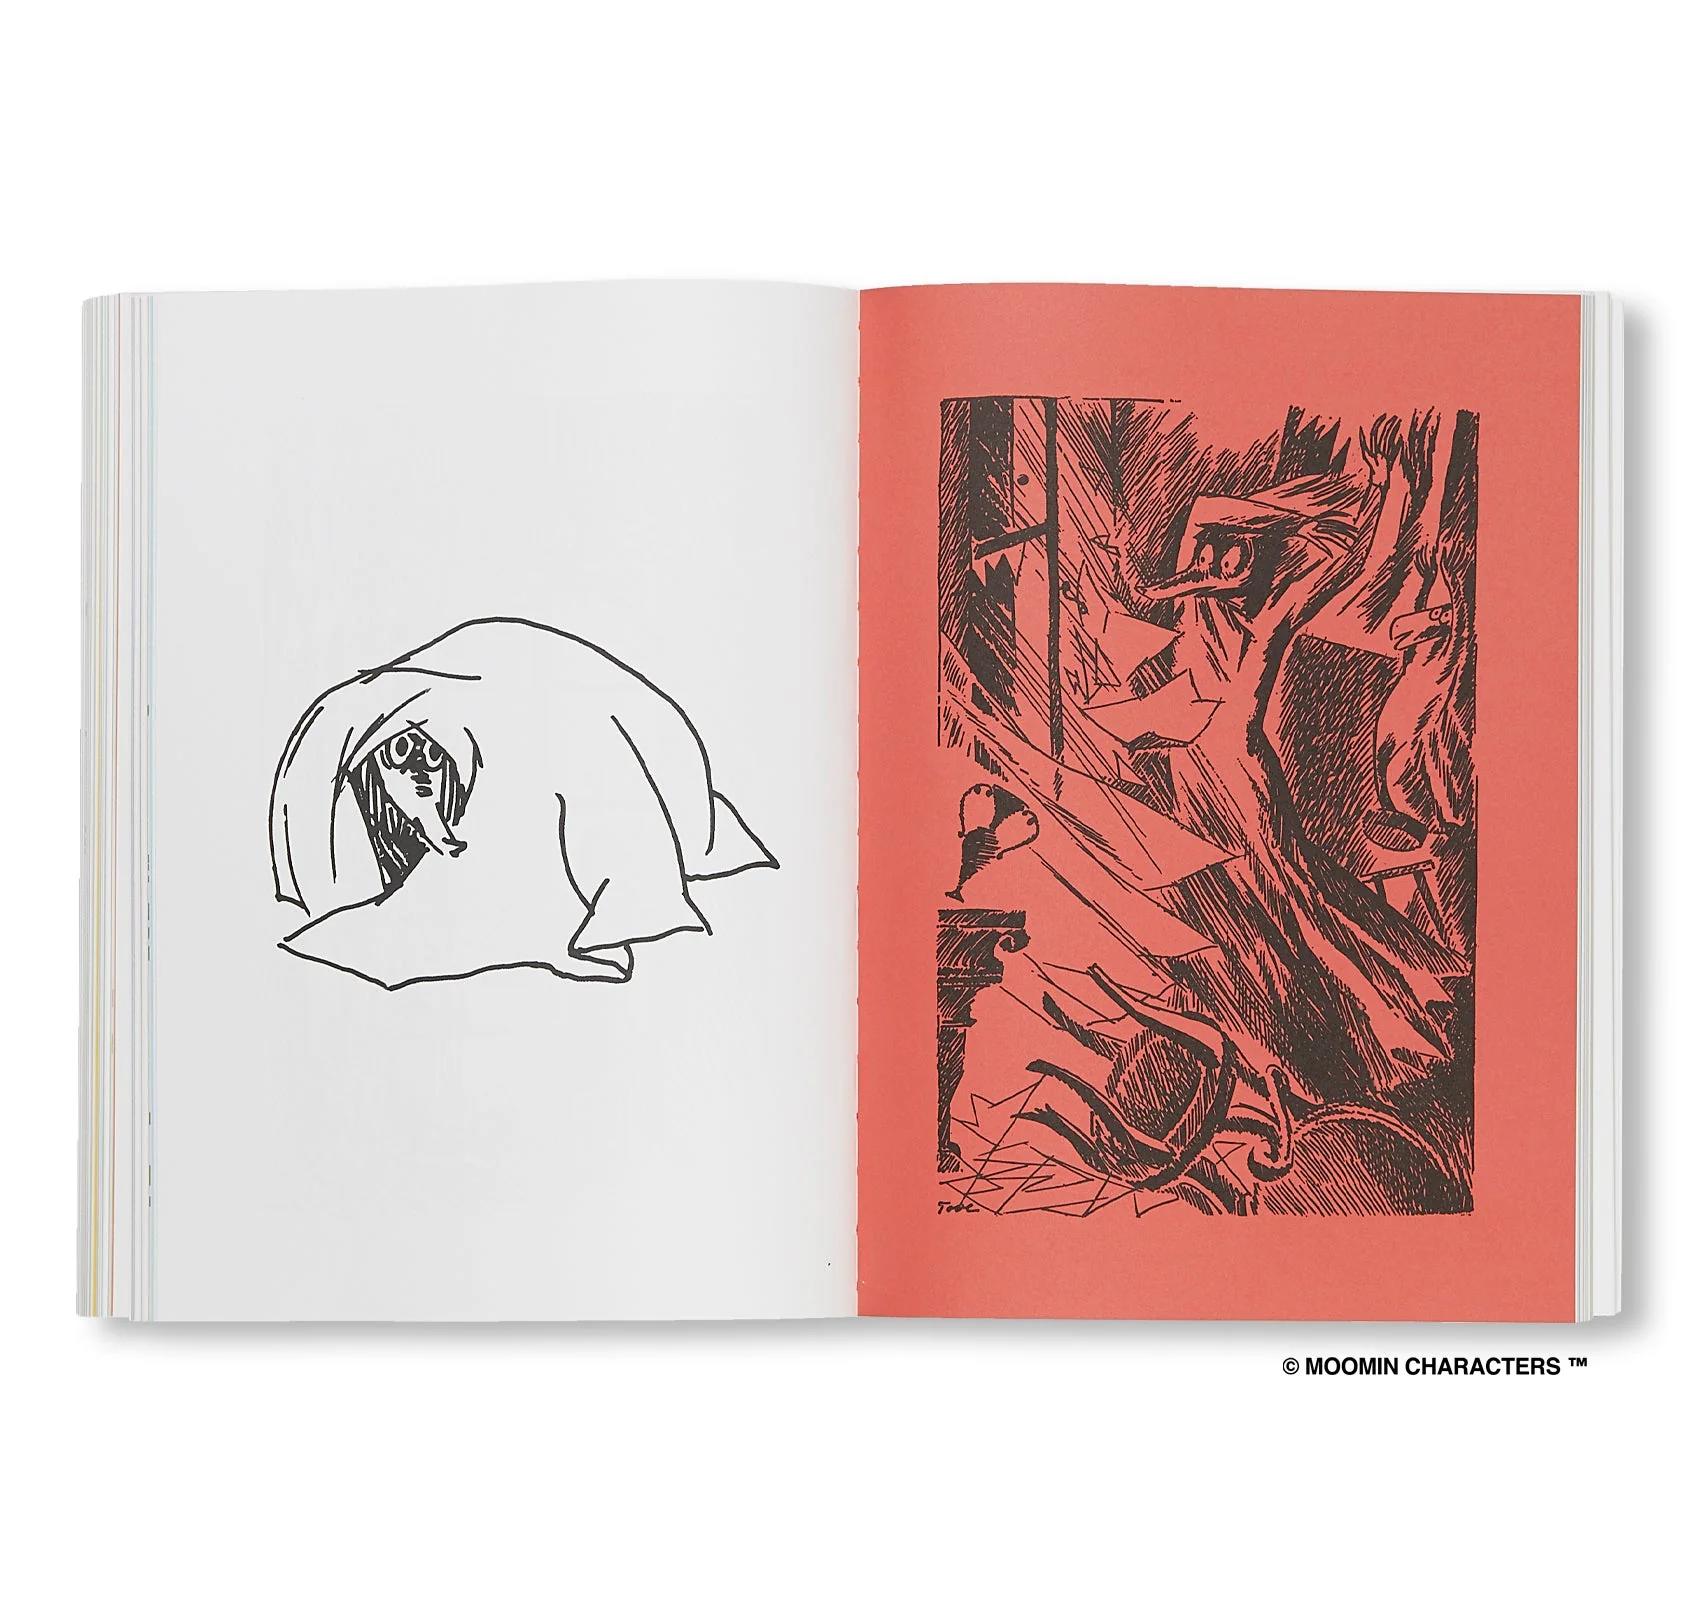 MOOMIN MISCHIEVOUS NATURE by Tove Marika Jansson [SOFTCOVER] IDEA 